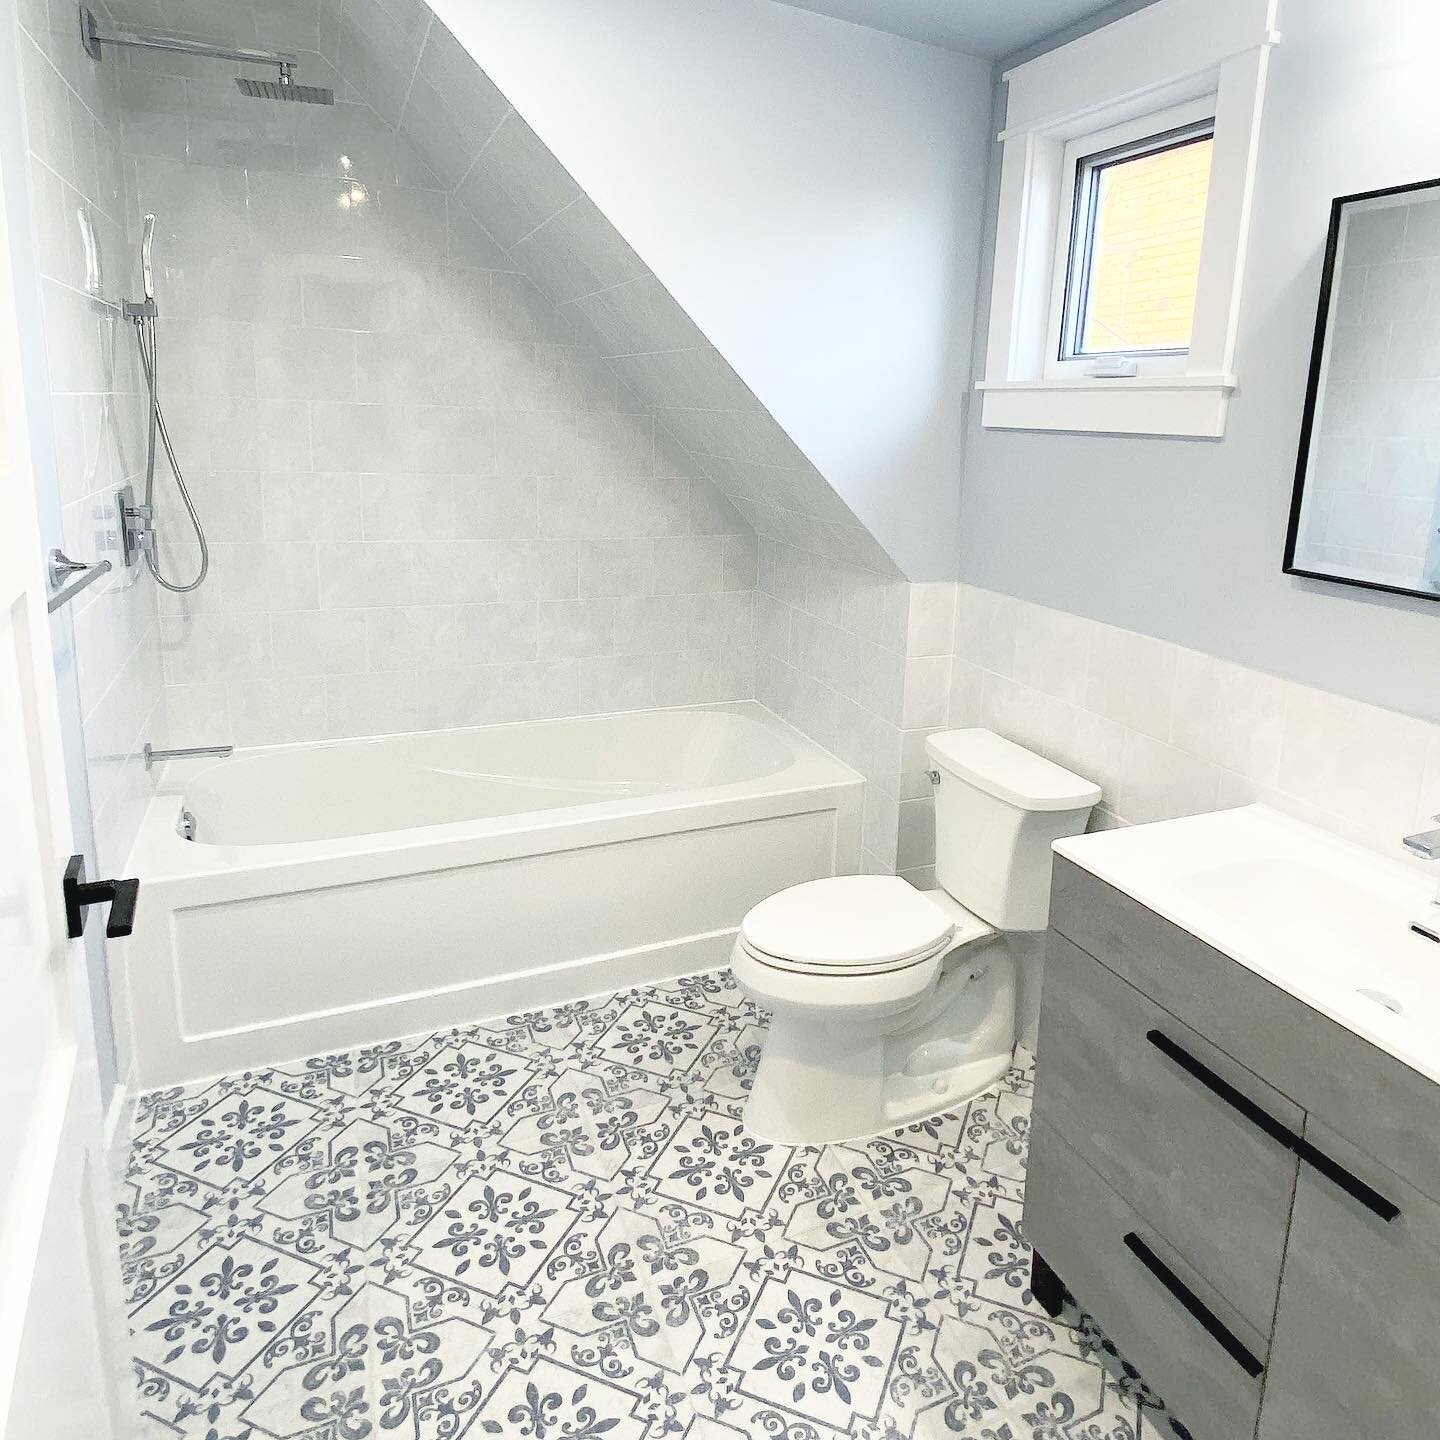 It&rsquo;s the weekend! Time for a bubble bath and some rest and relaxation 🛁

Ps. Can you believe this bathroom is in a laneway house? No compromise on amenities here 👌🏼

#lifeofacontractor #homereno #customhomes #builditbetter #reno #renovation 